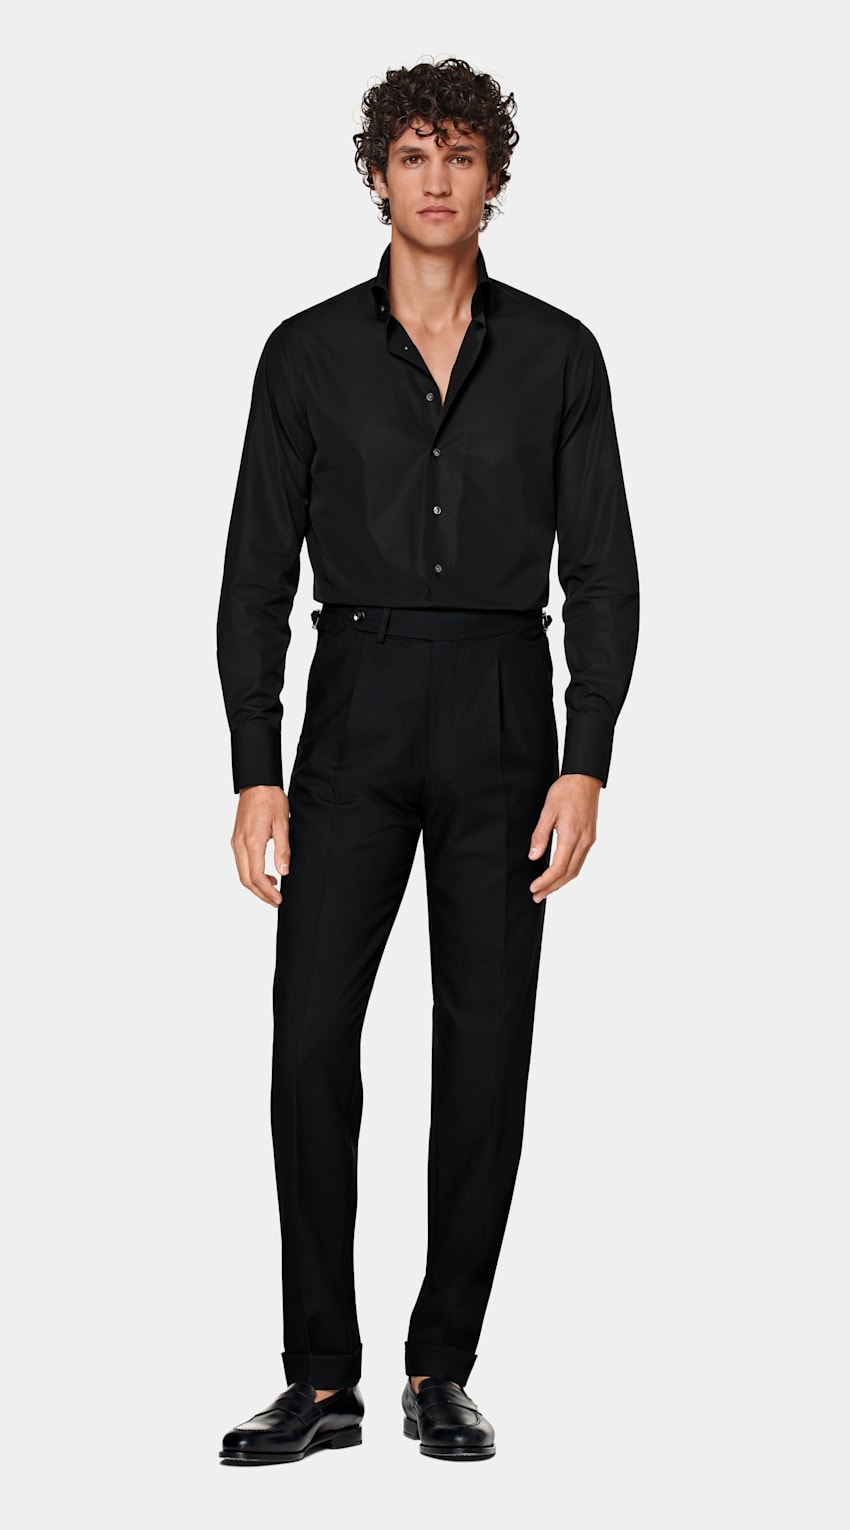 SUITSUPPLY Egyptian Cotton by Testa Spa, Italy Black Twill Tailored Fit Shirt